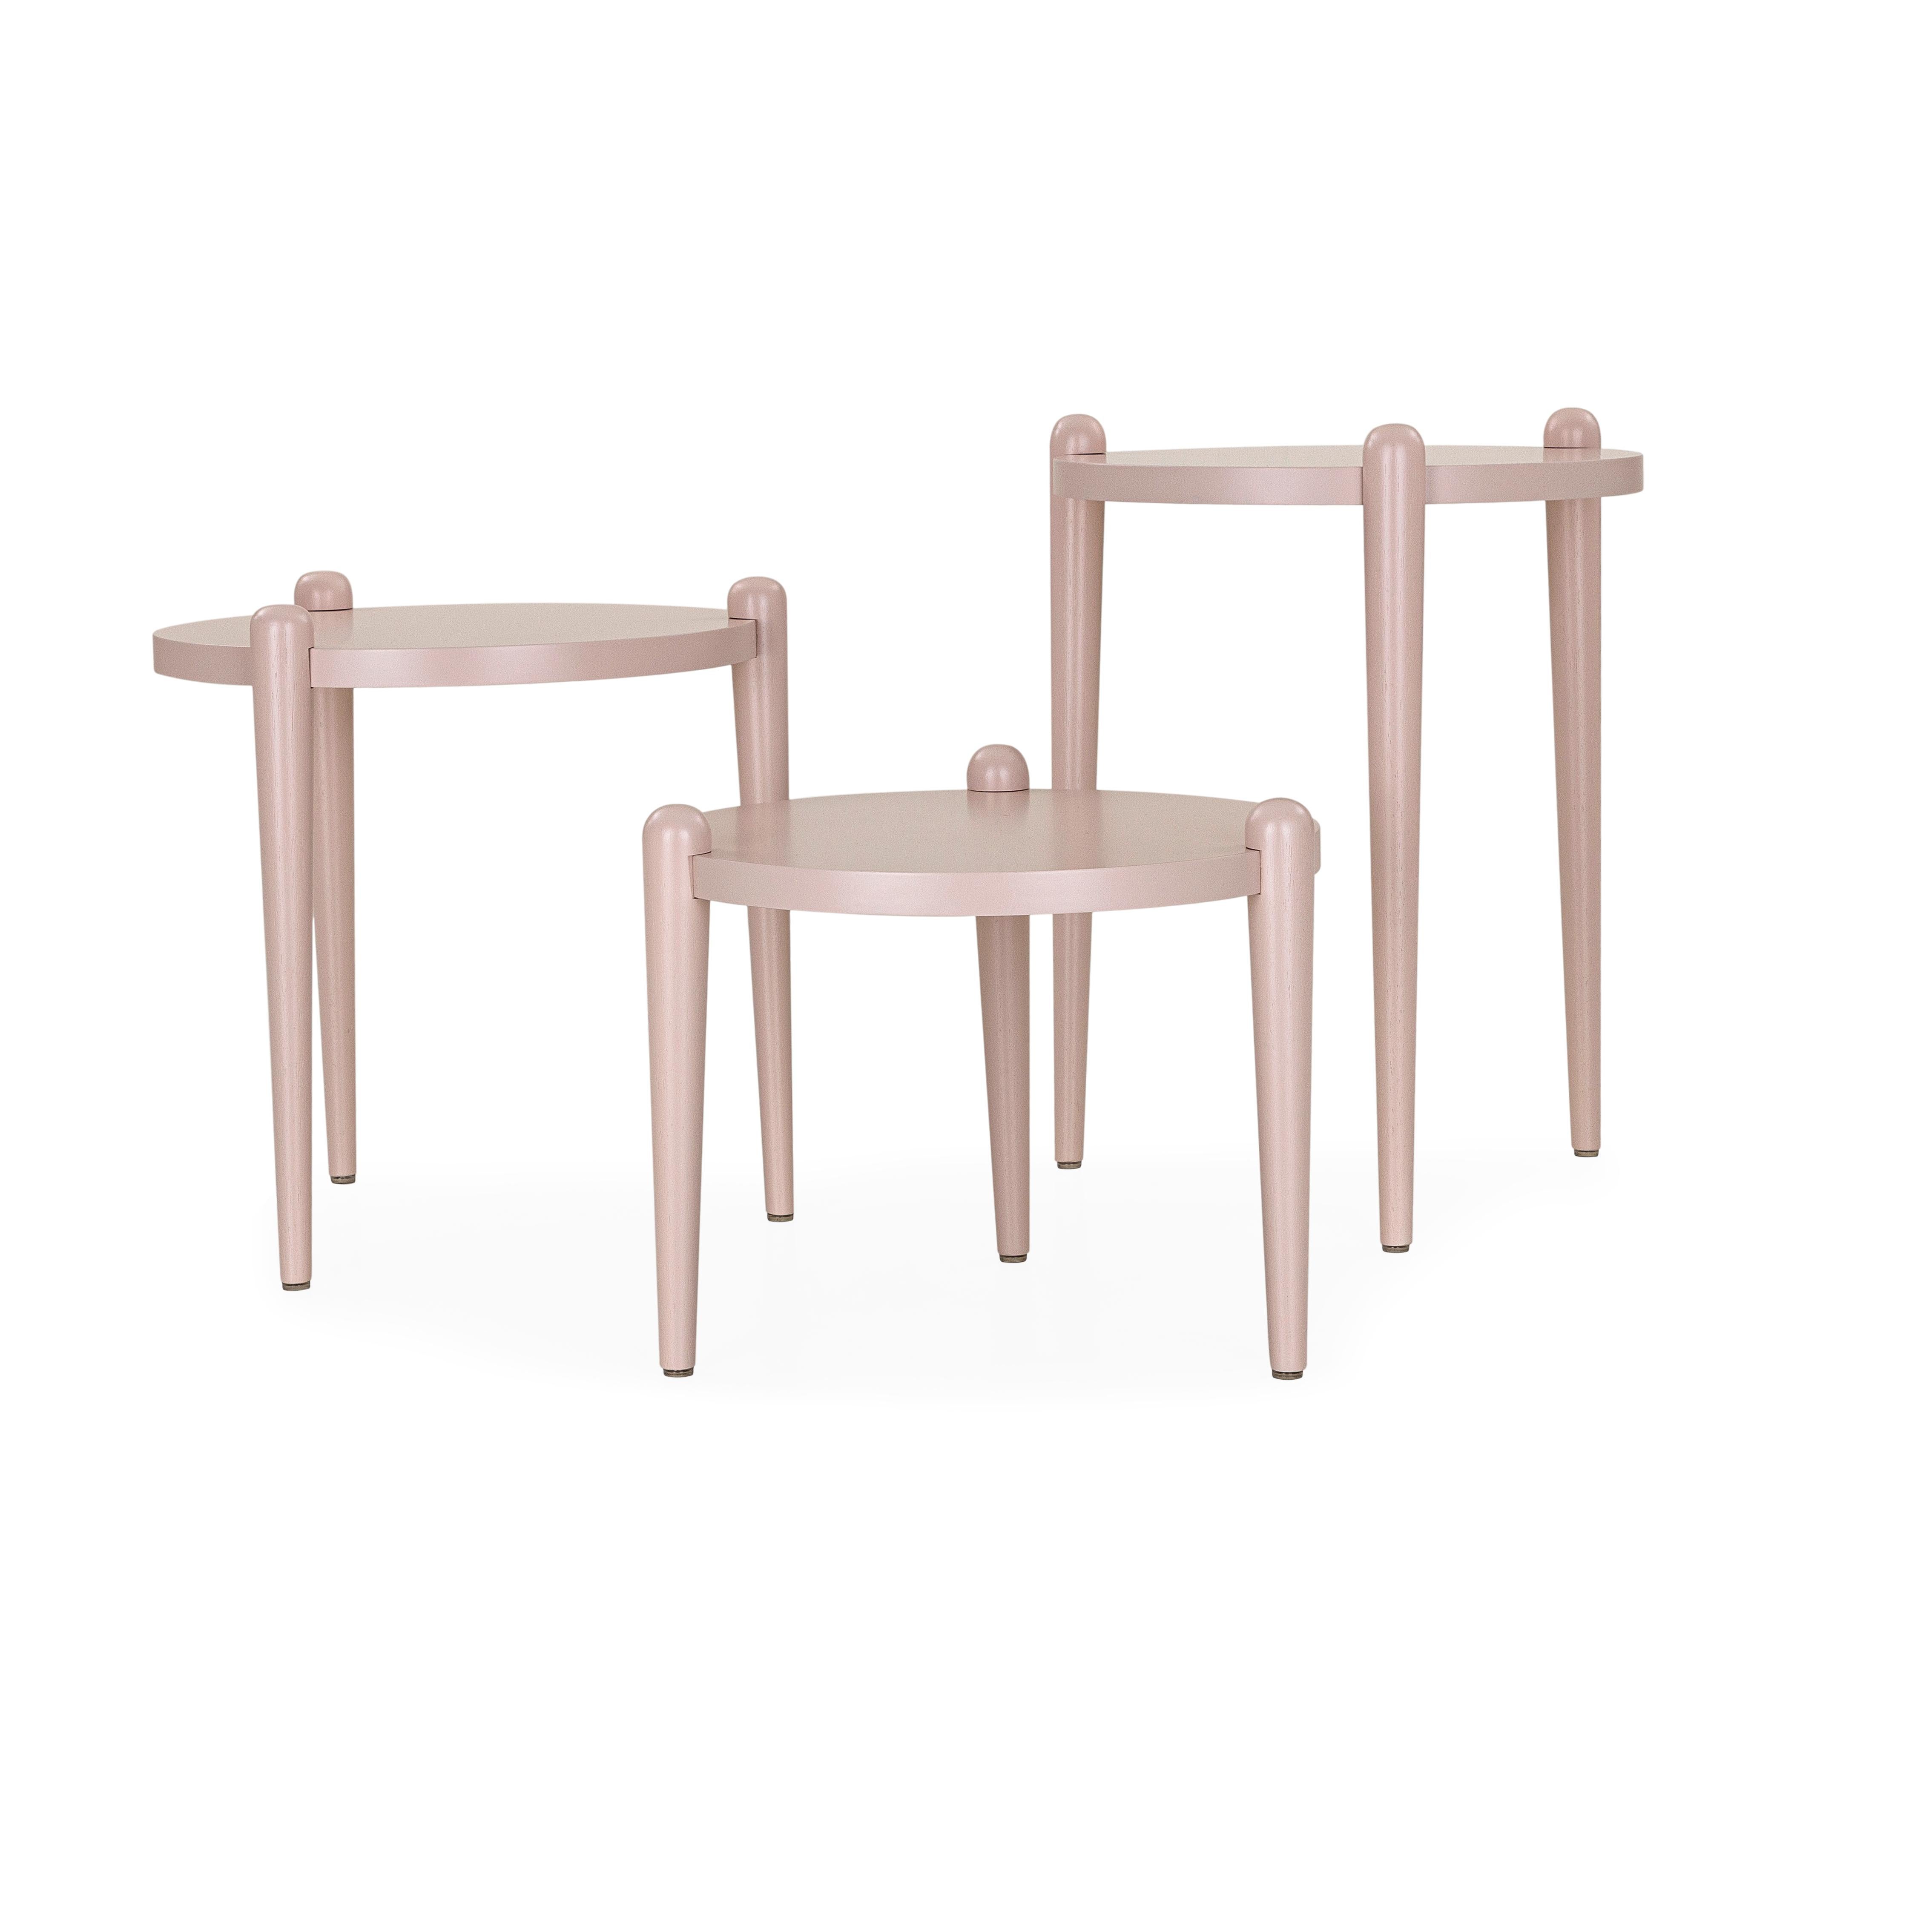 Pan Contemporary Side Tables in Light Pink Quartz Finish, Set of 3 For Sale 3